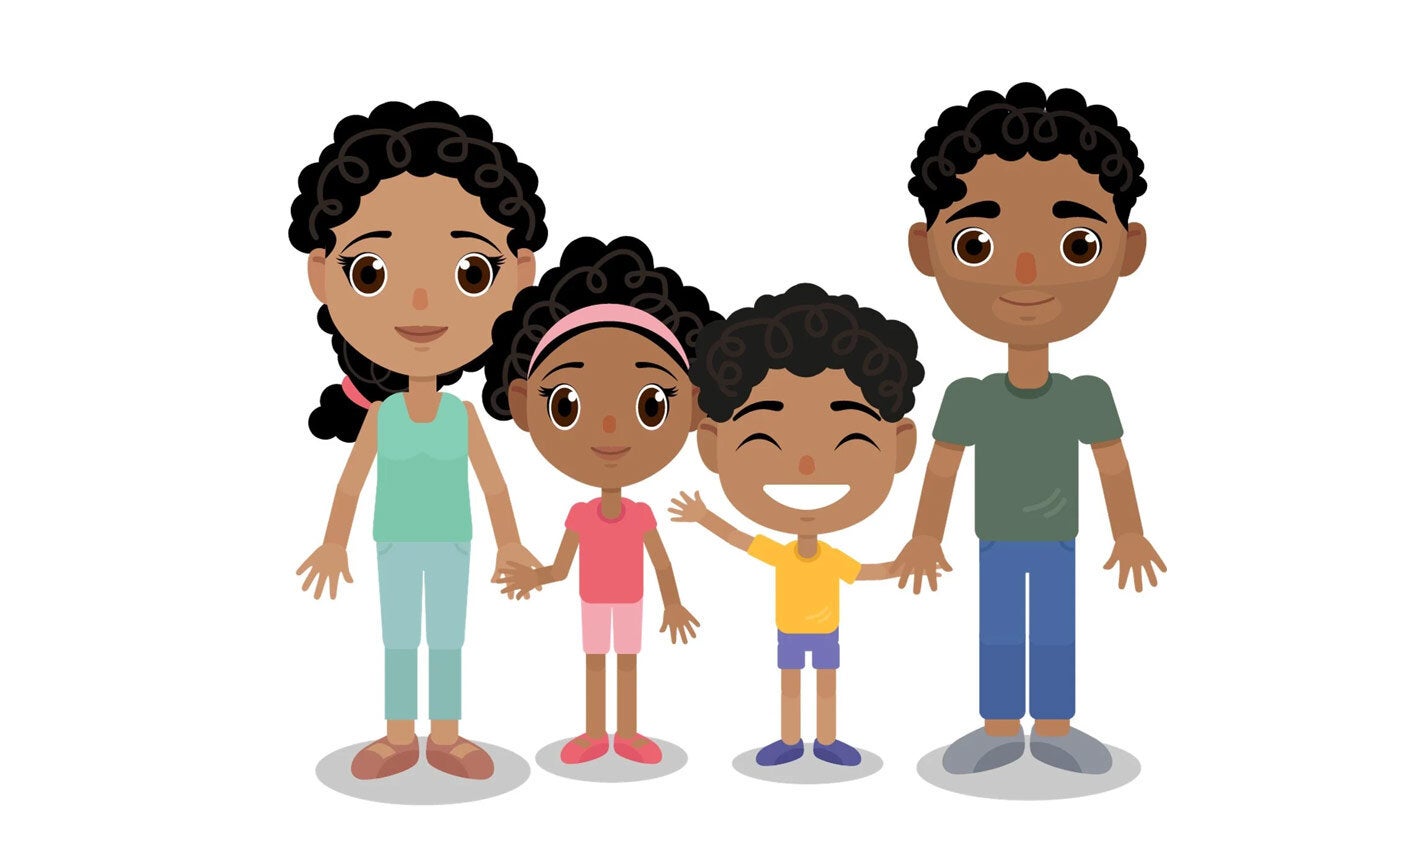 illustration of a family of four: mom, girl, boy and dad